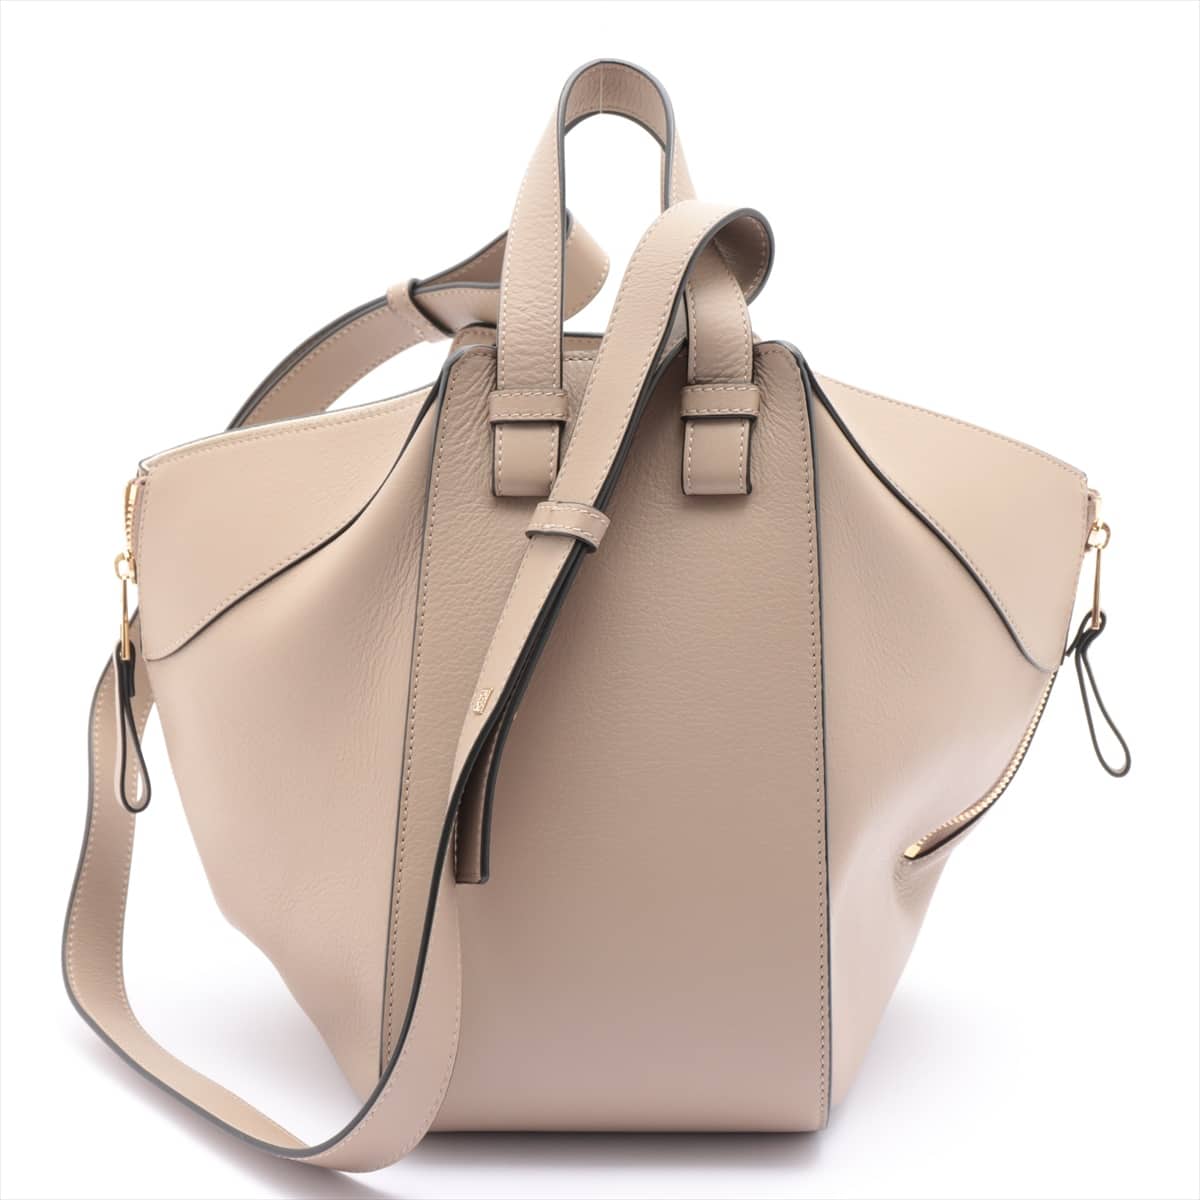 Loewe Hammock small Leather 2way shoulder bag Beige There is an outlet mark